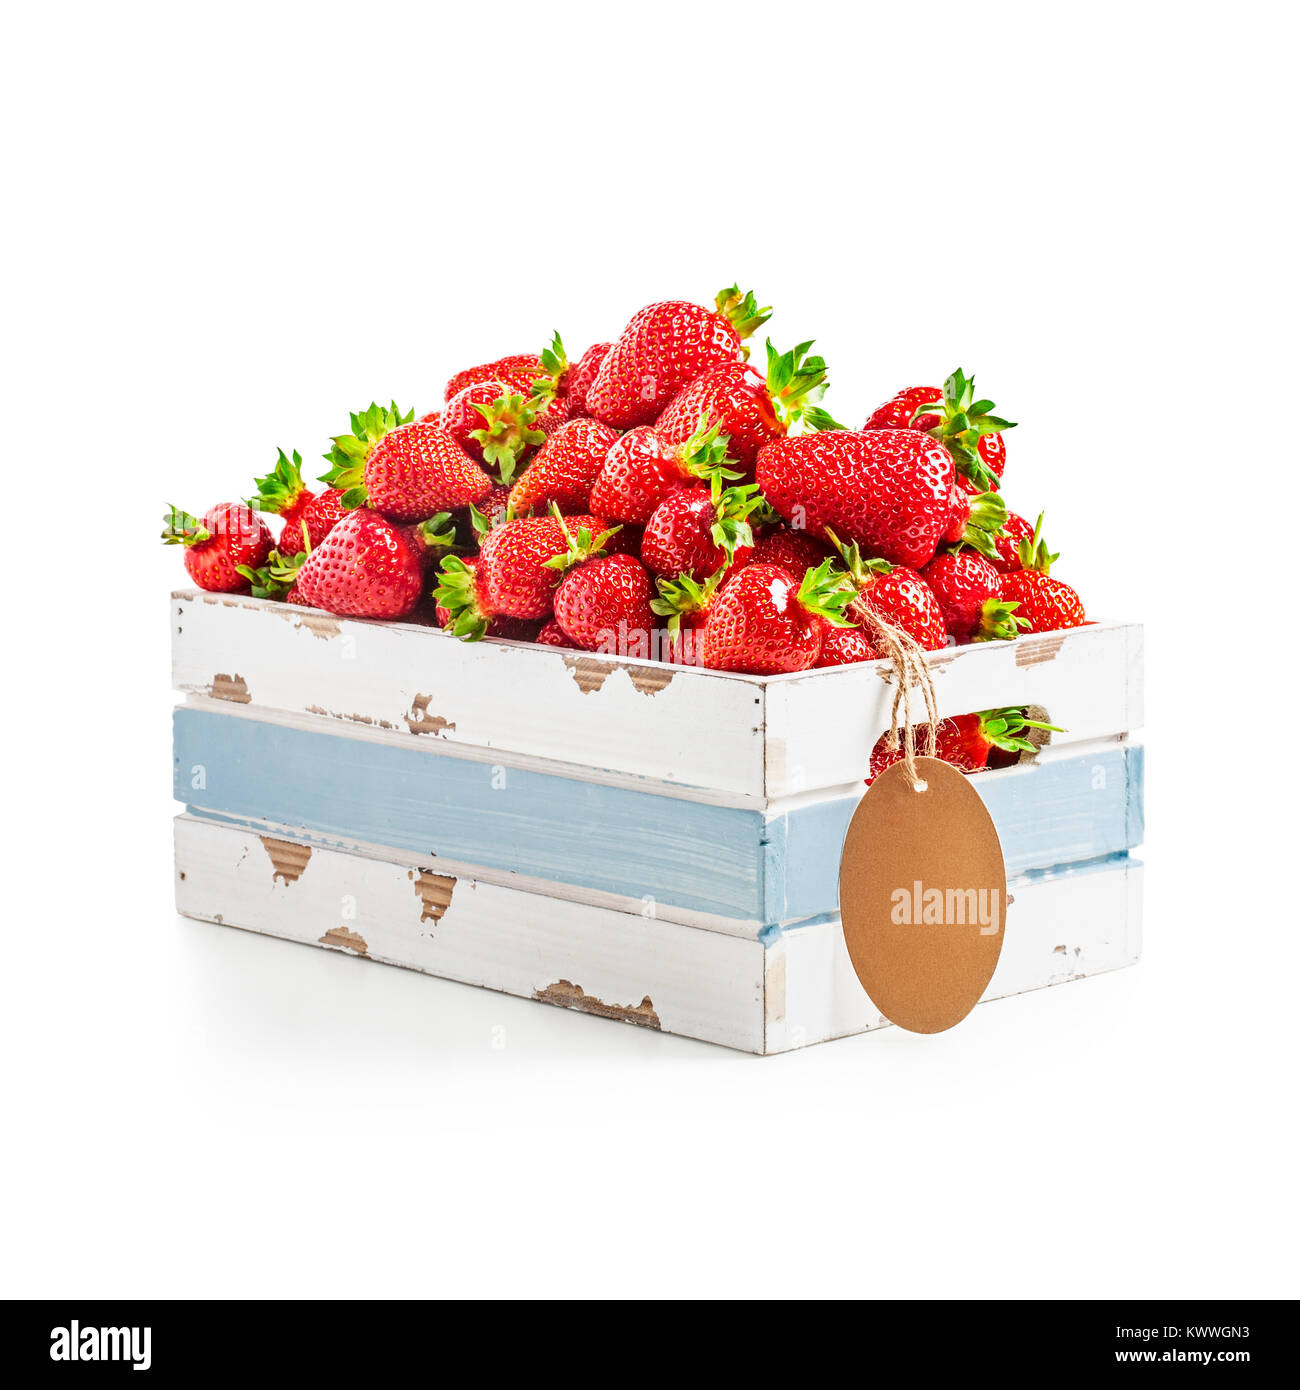 Fresh strawberries in old wooden crate with tag label isolated on white background. Healthy eating. Single object with clipping path Stock Photo